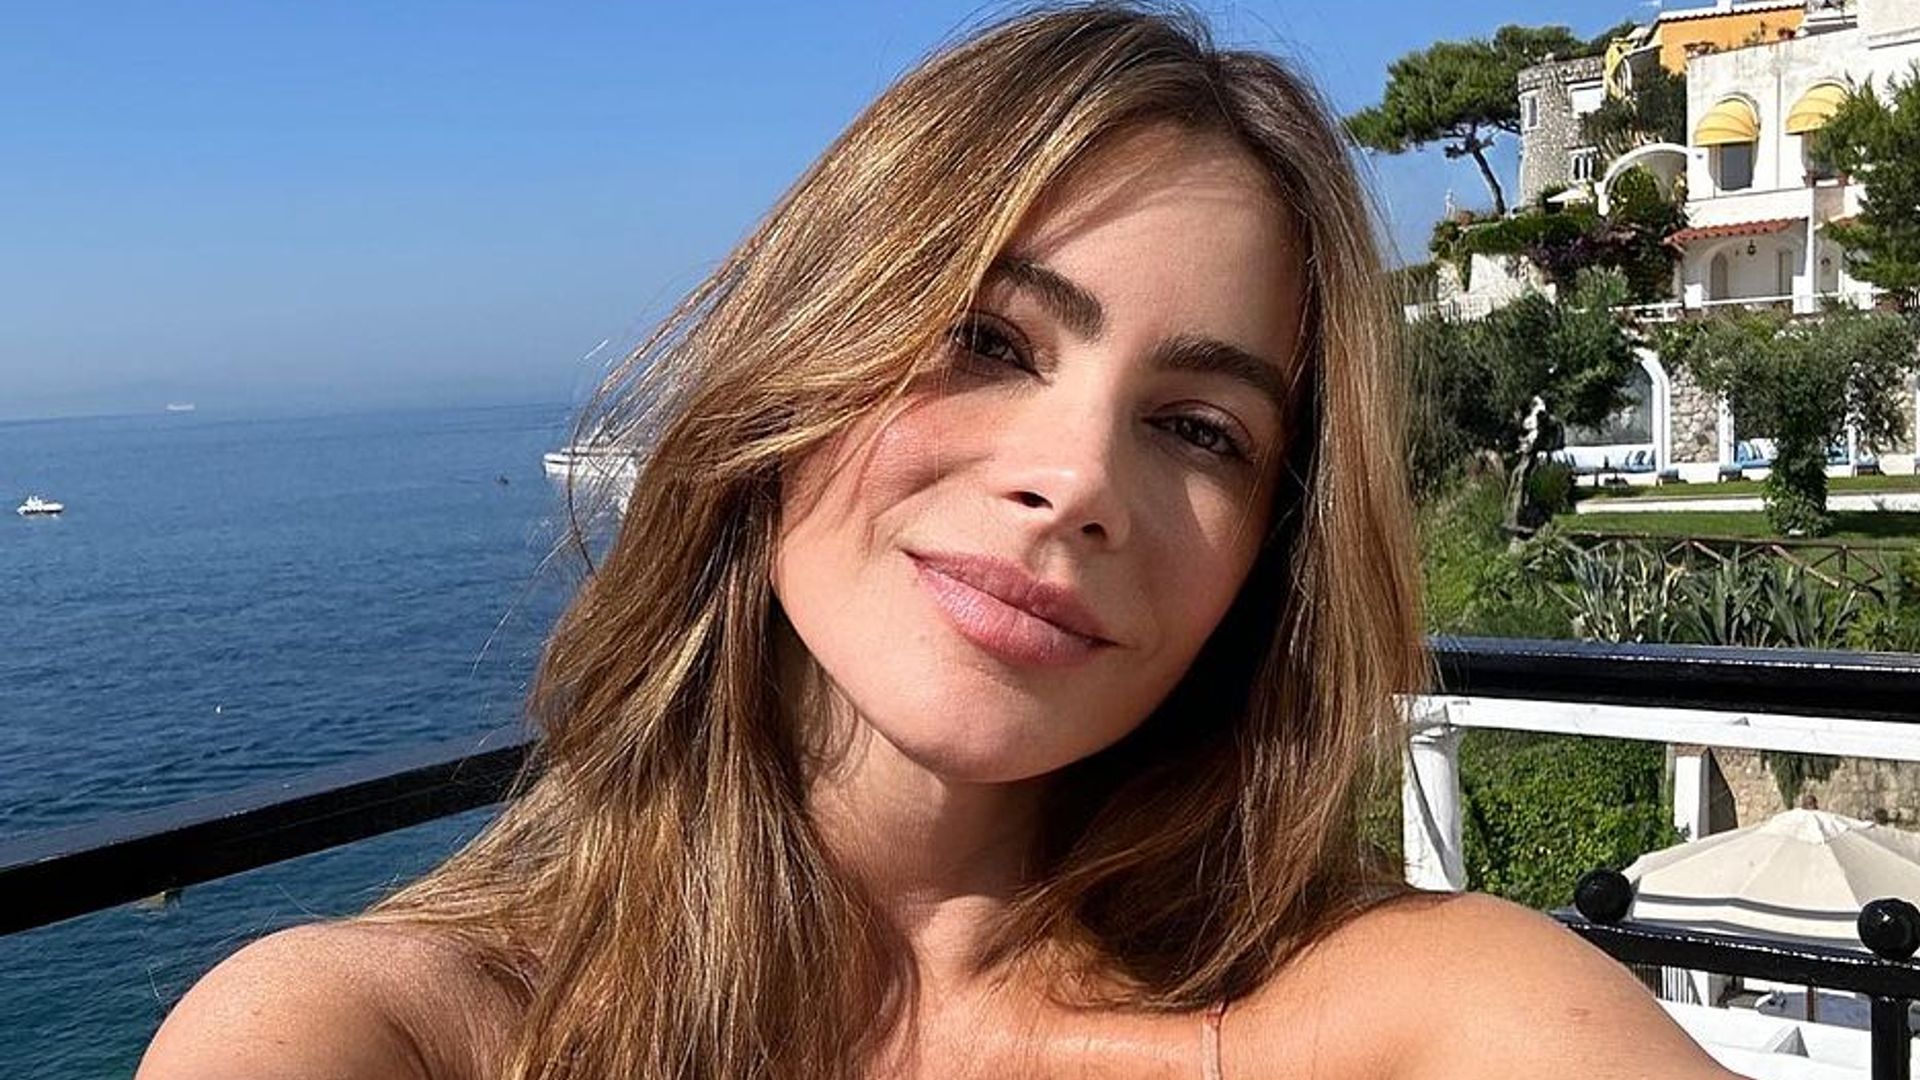 Sofia Vergara in a striped dress taking a selfie from her balcony overlooking the sea